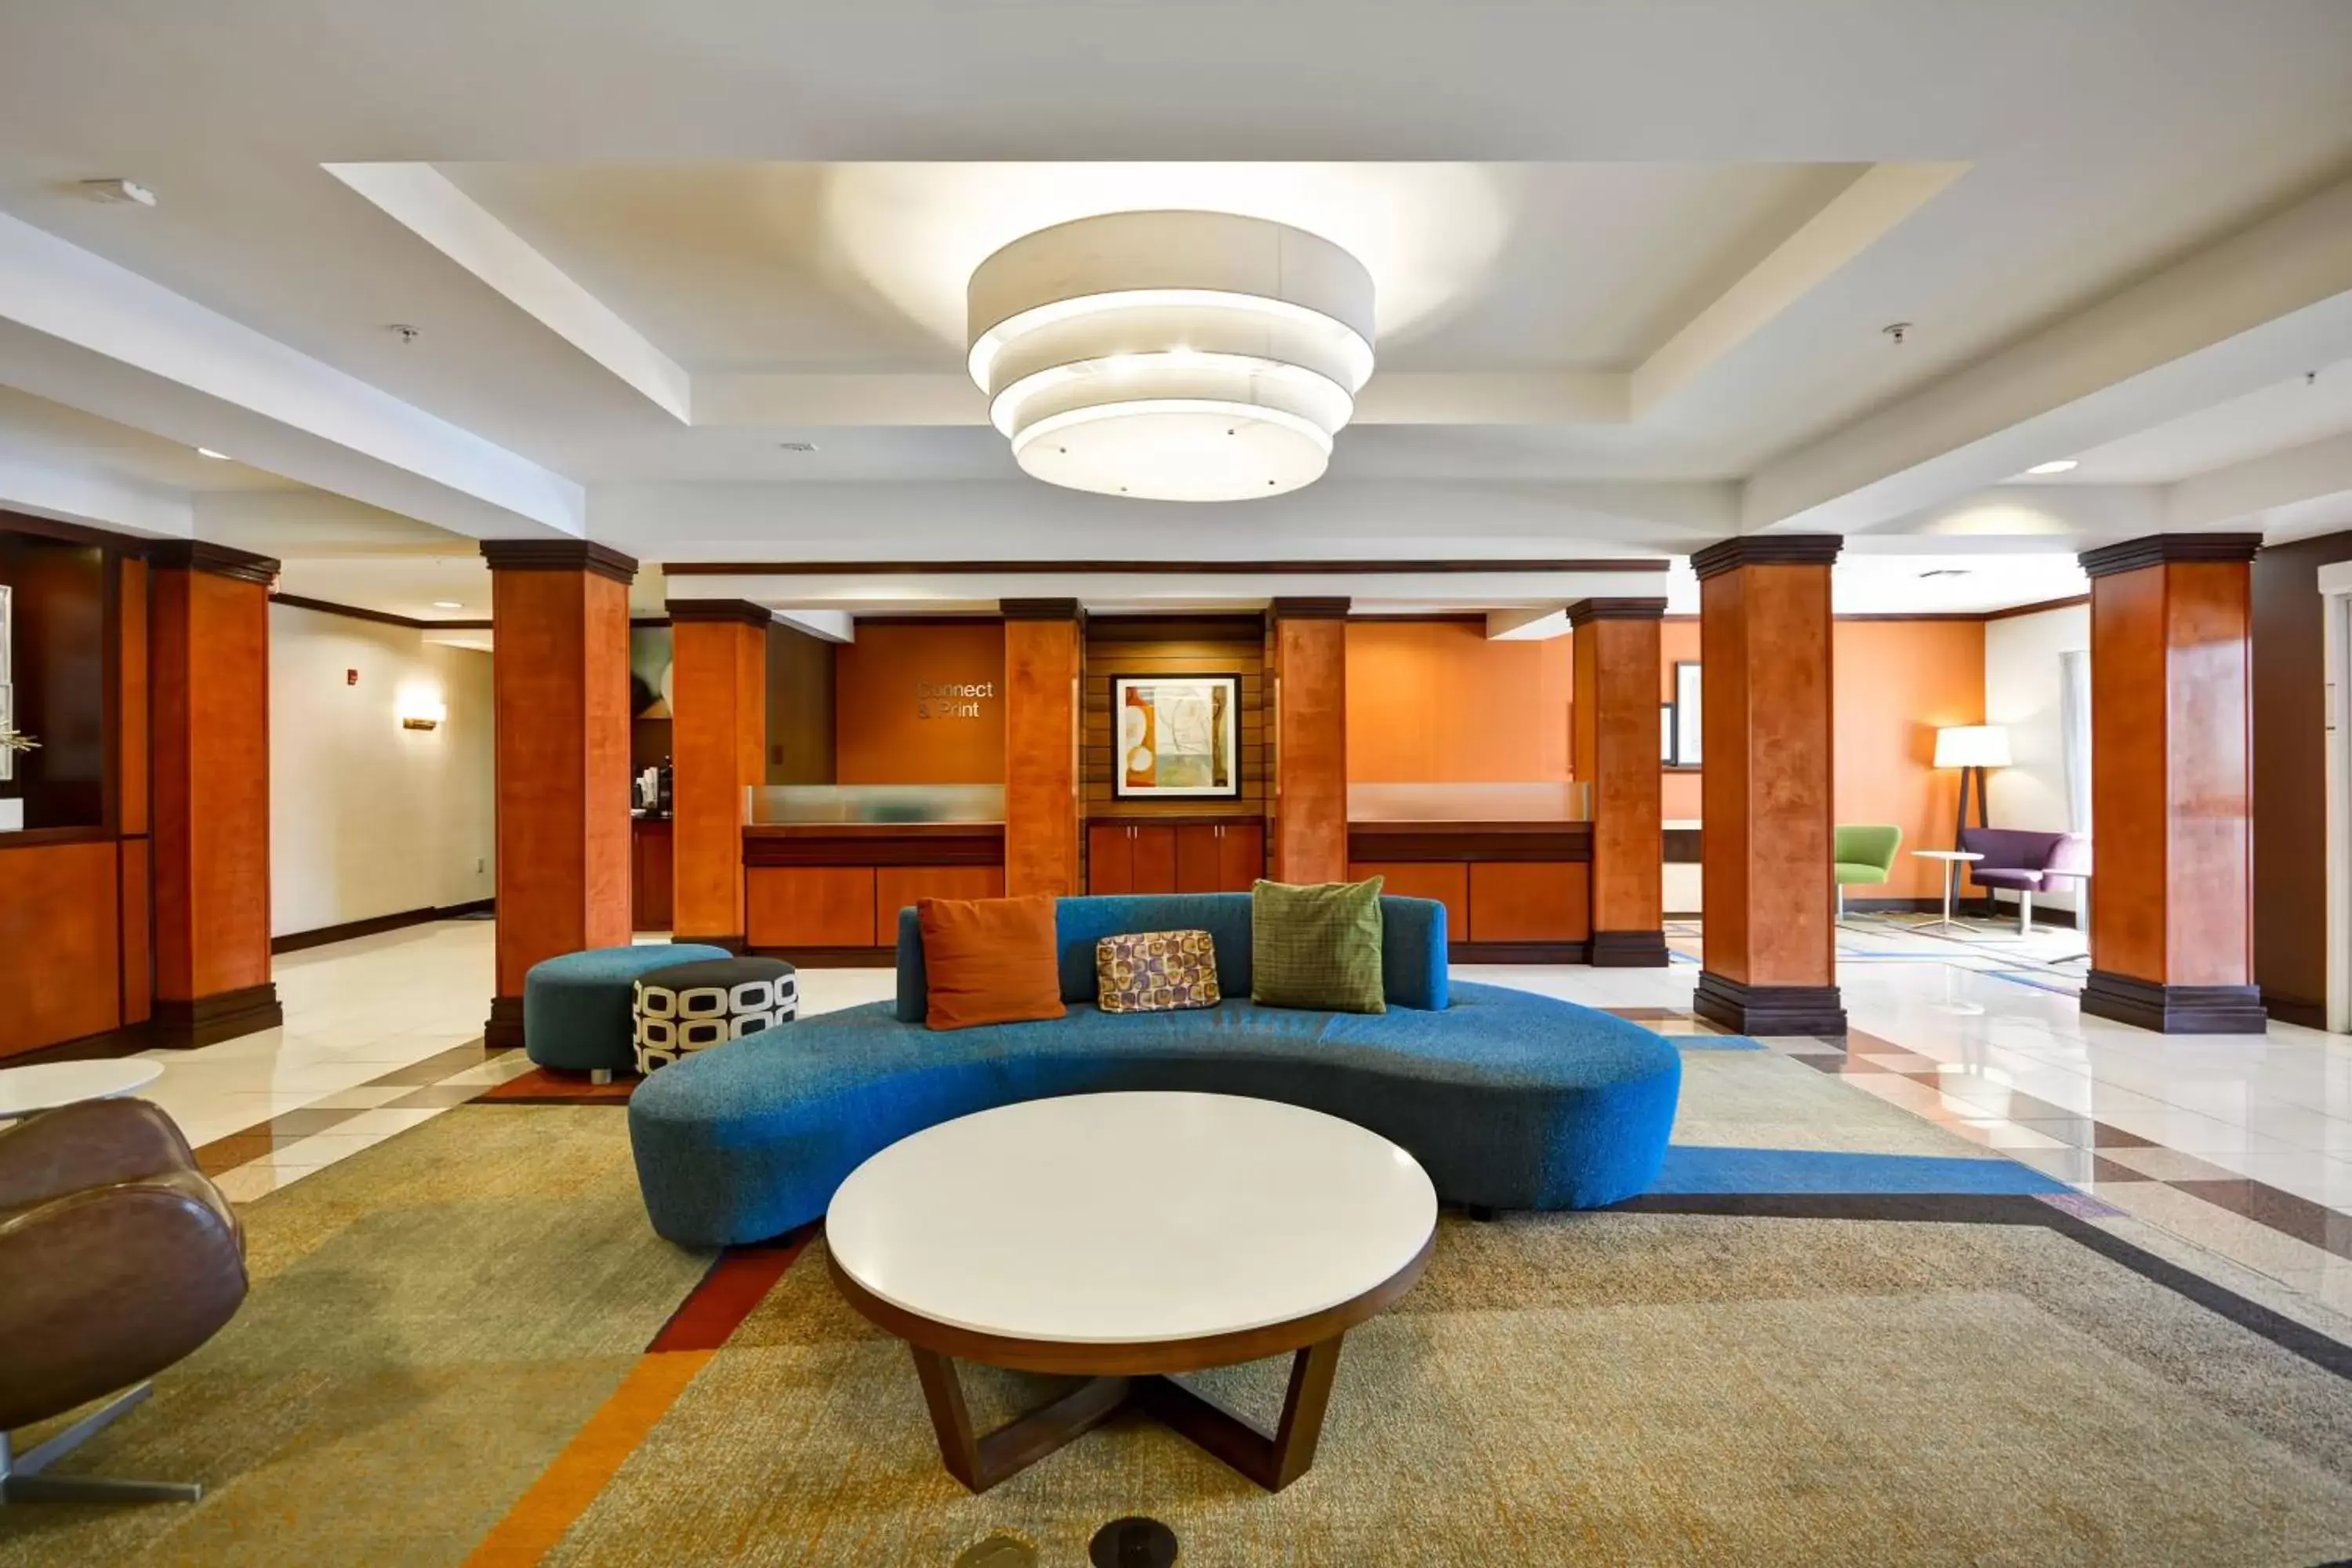 Lobby or reception in Fairfield Inn and Suites by Marriott Birmingham Fultondale / I-65